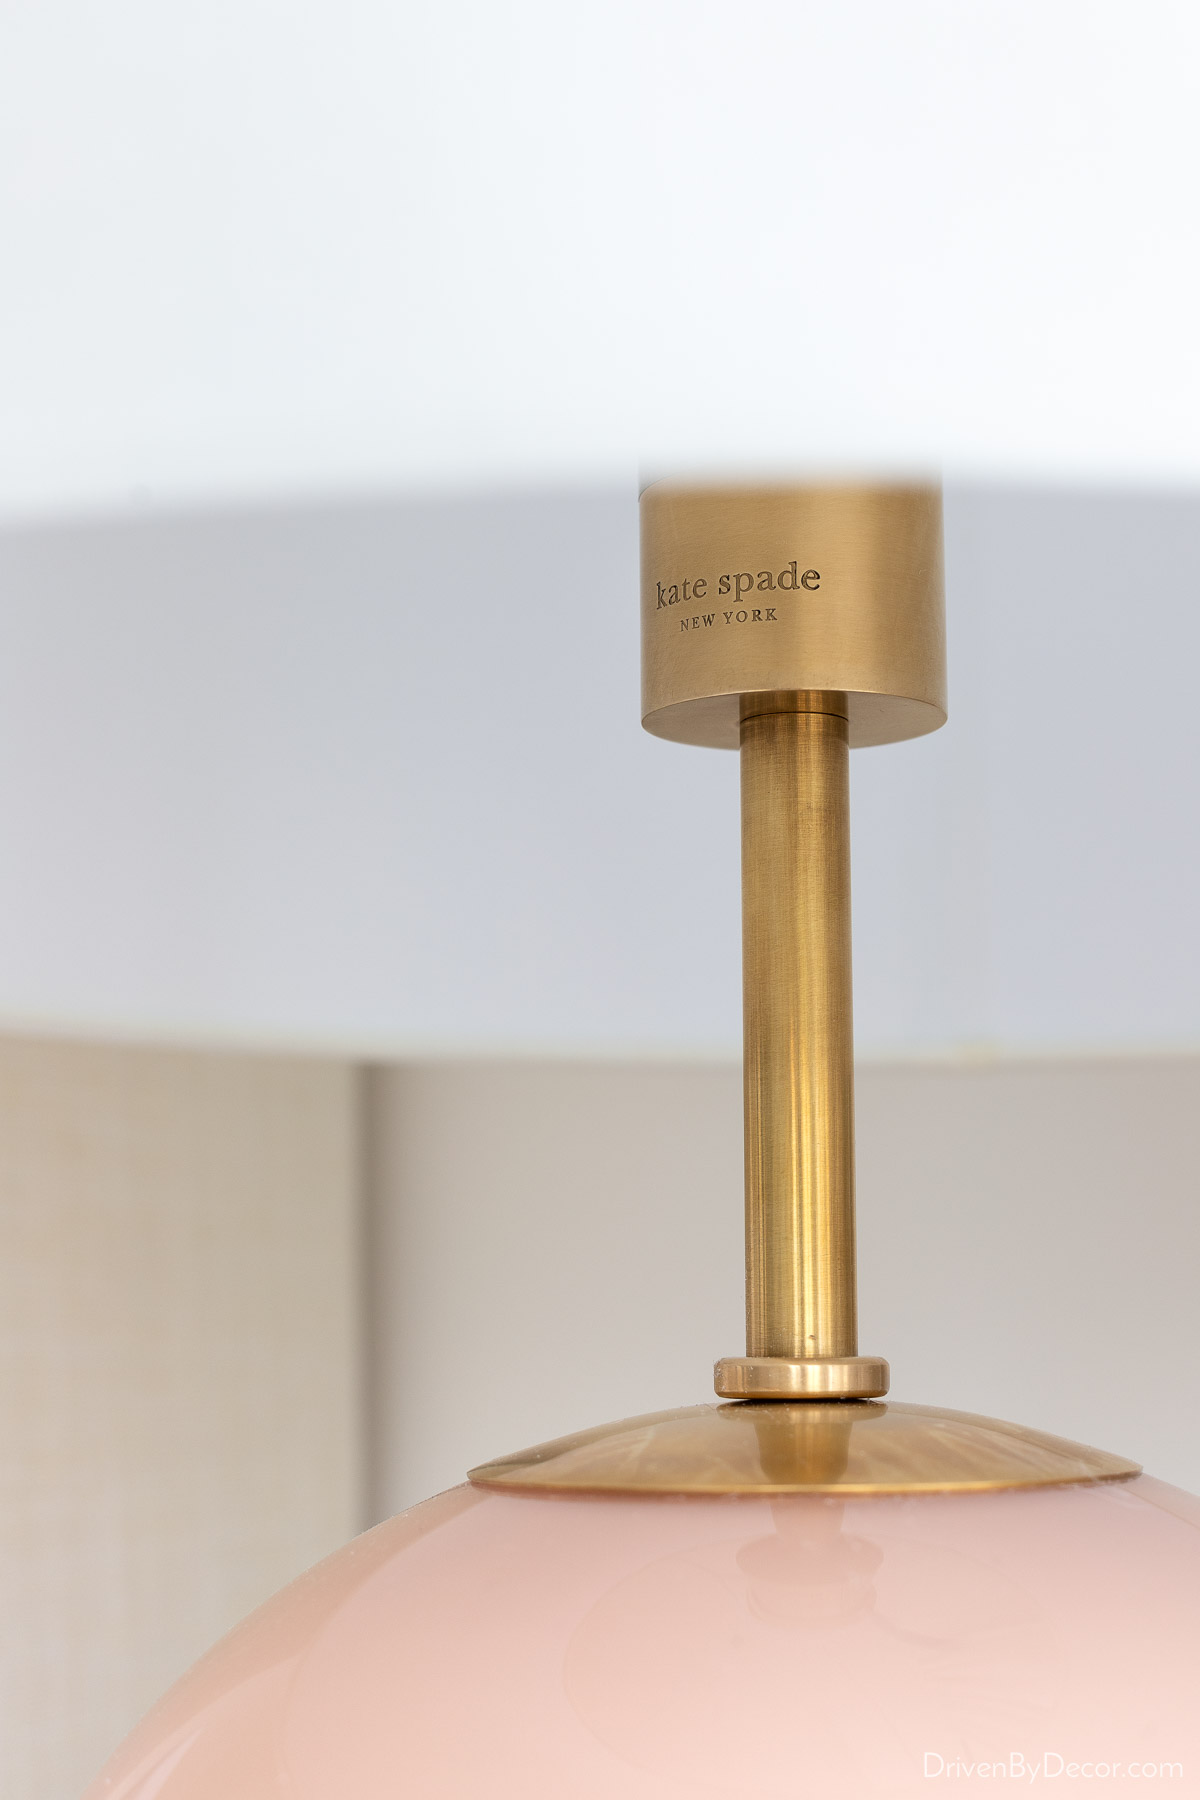 Bedroom lamp with no turn switch knob